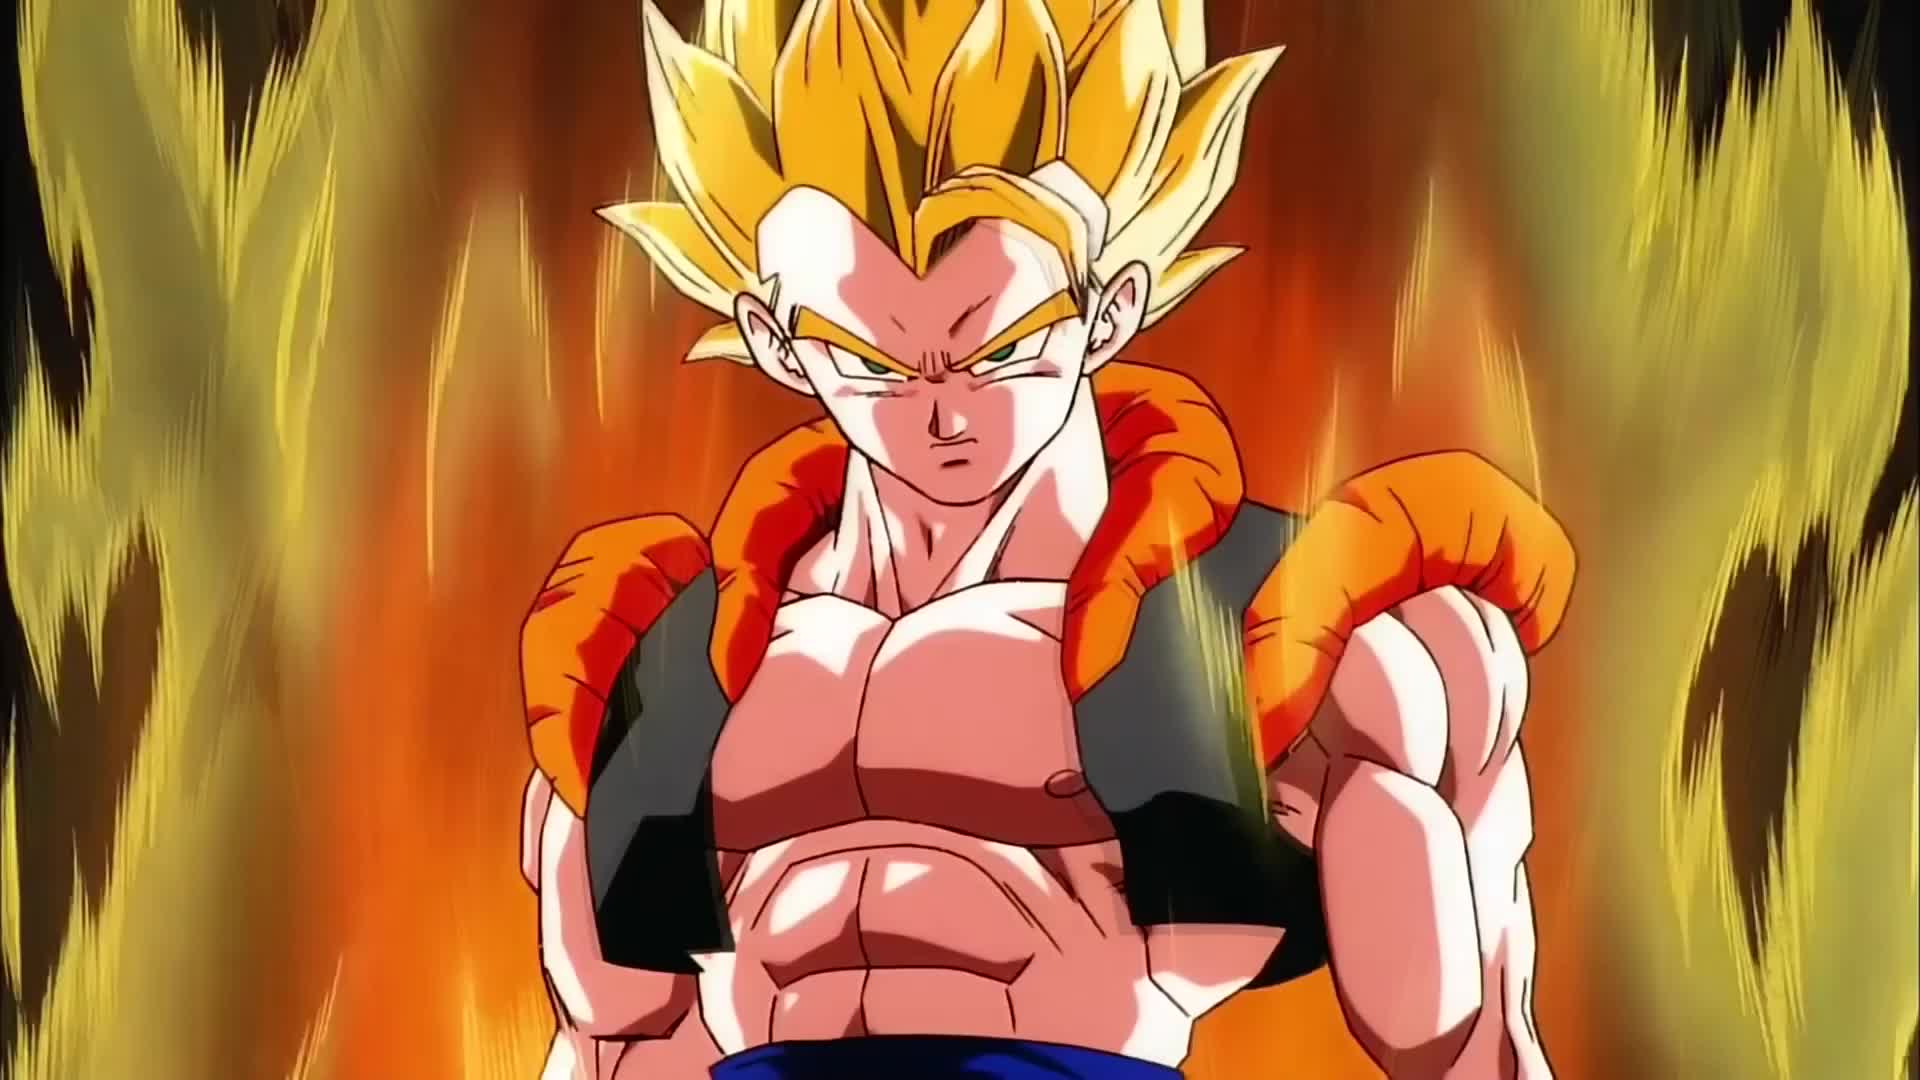 Gogeta DesktopHut - Live Wallpapers and Animated Wallpapers 4K/HD